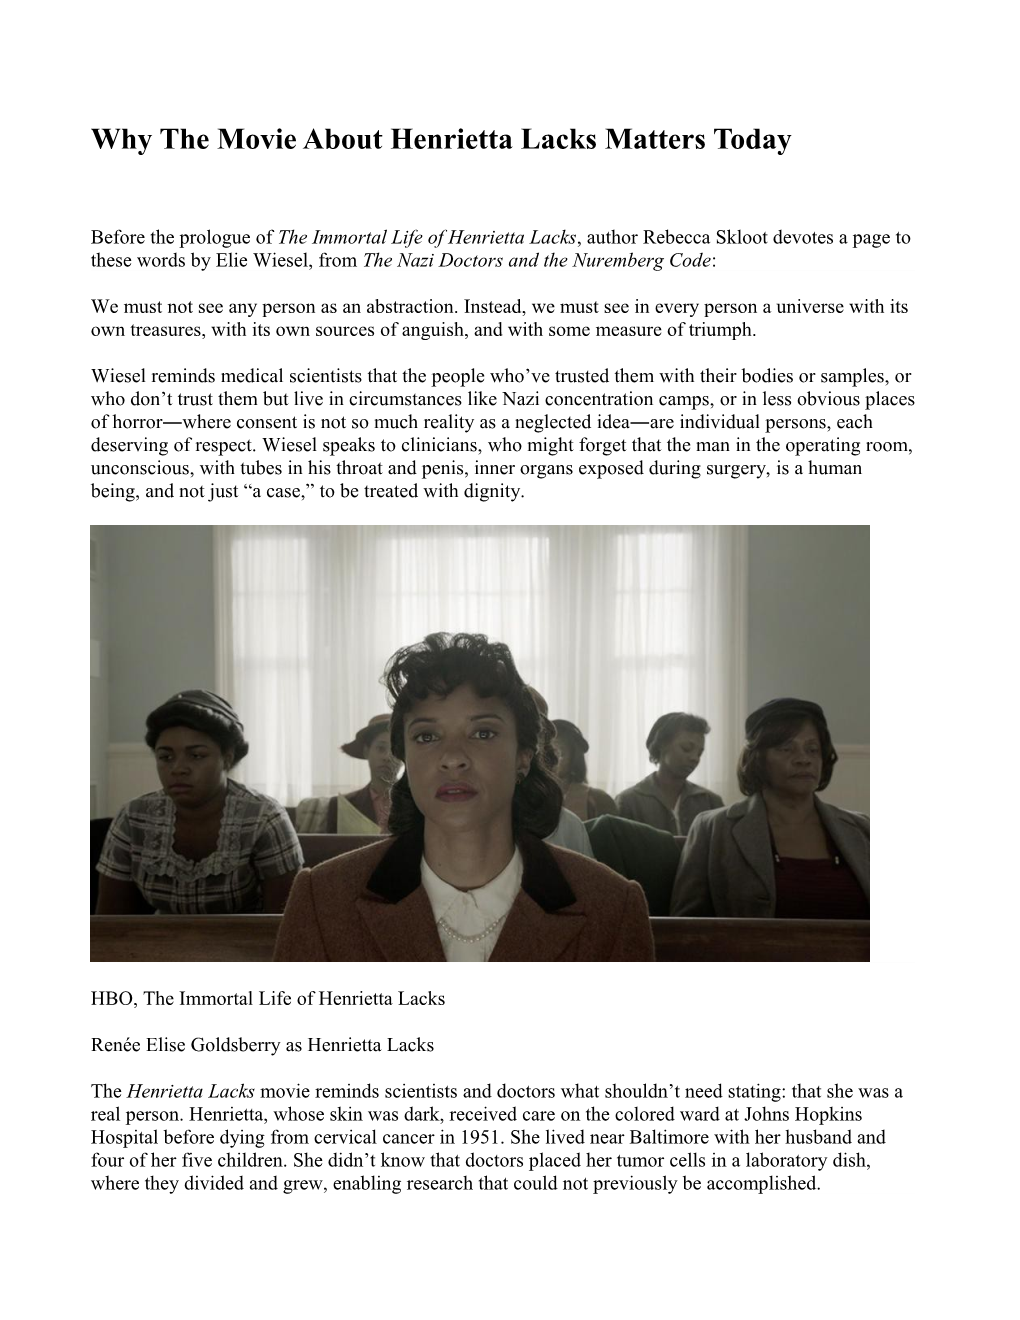 Why the Movie About Henrietta Lacks Matters Today